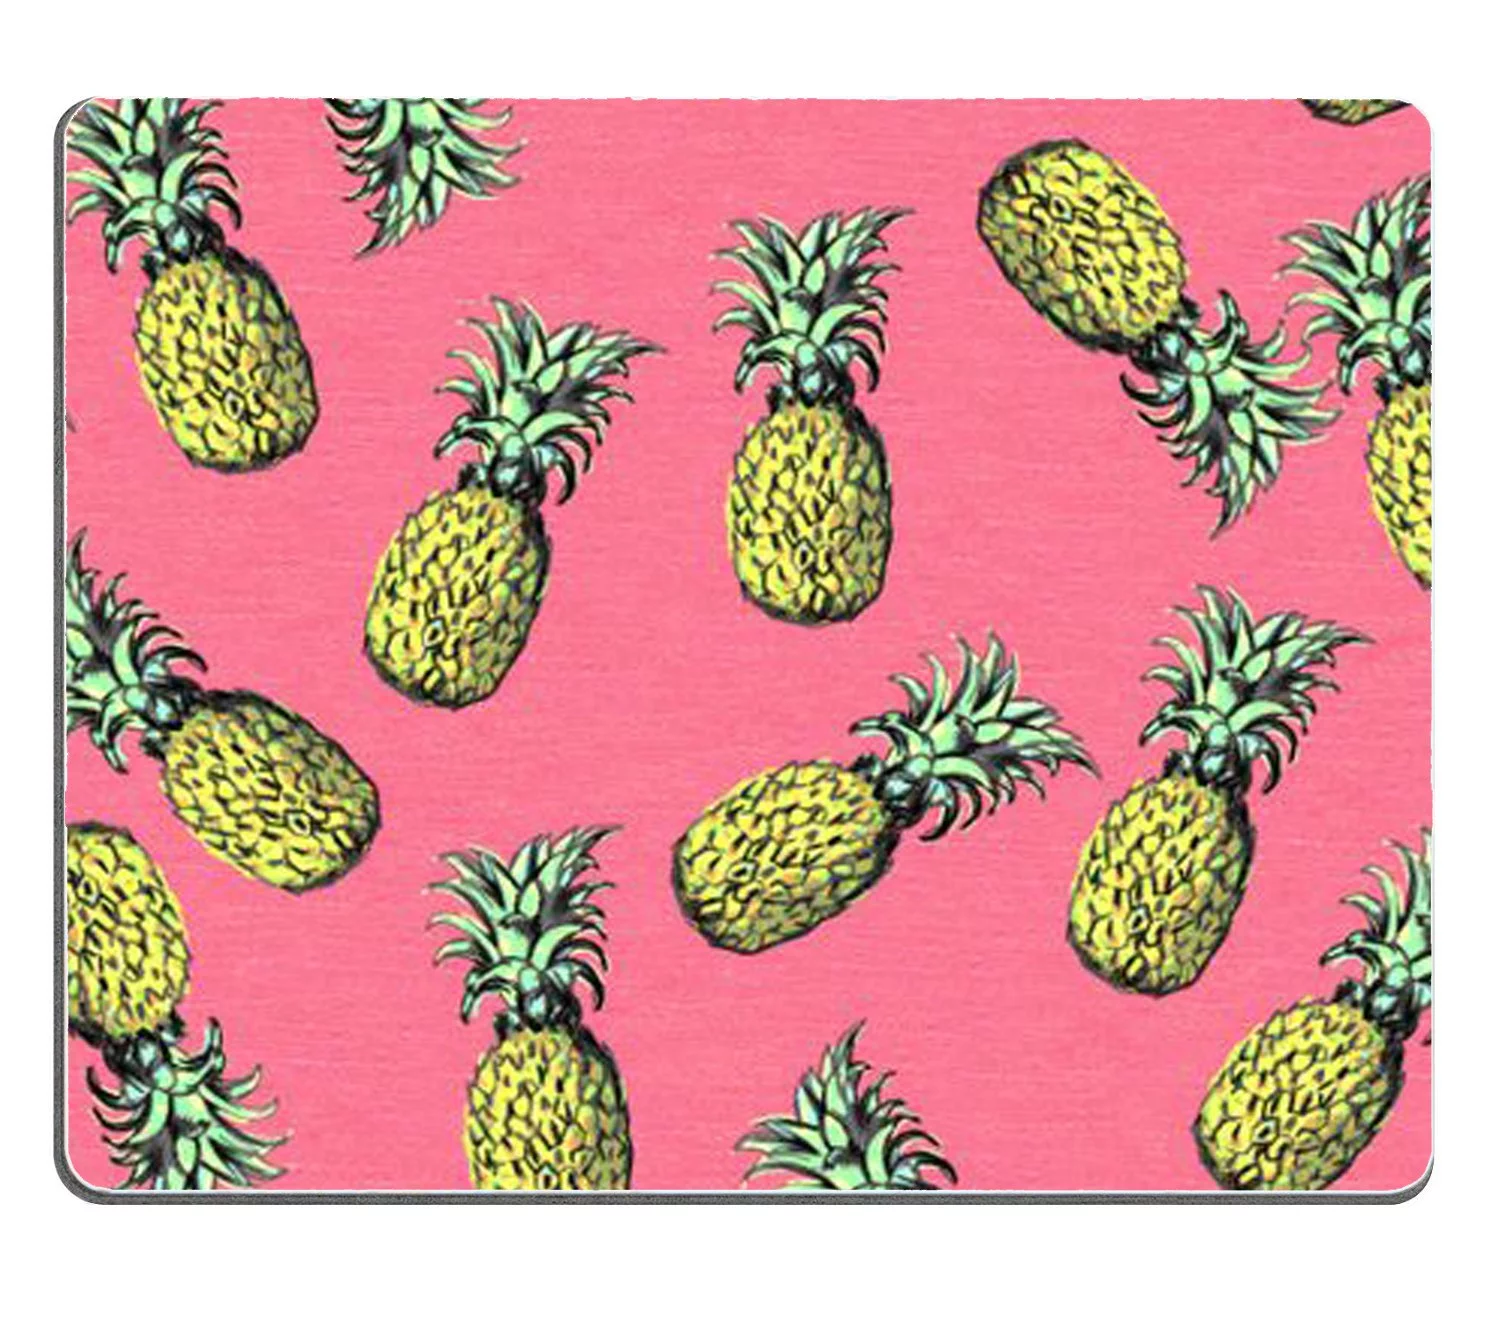 Best Coworker Gifts 2022: Cool Pineapple Mousepad for Boss 2022